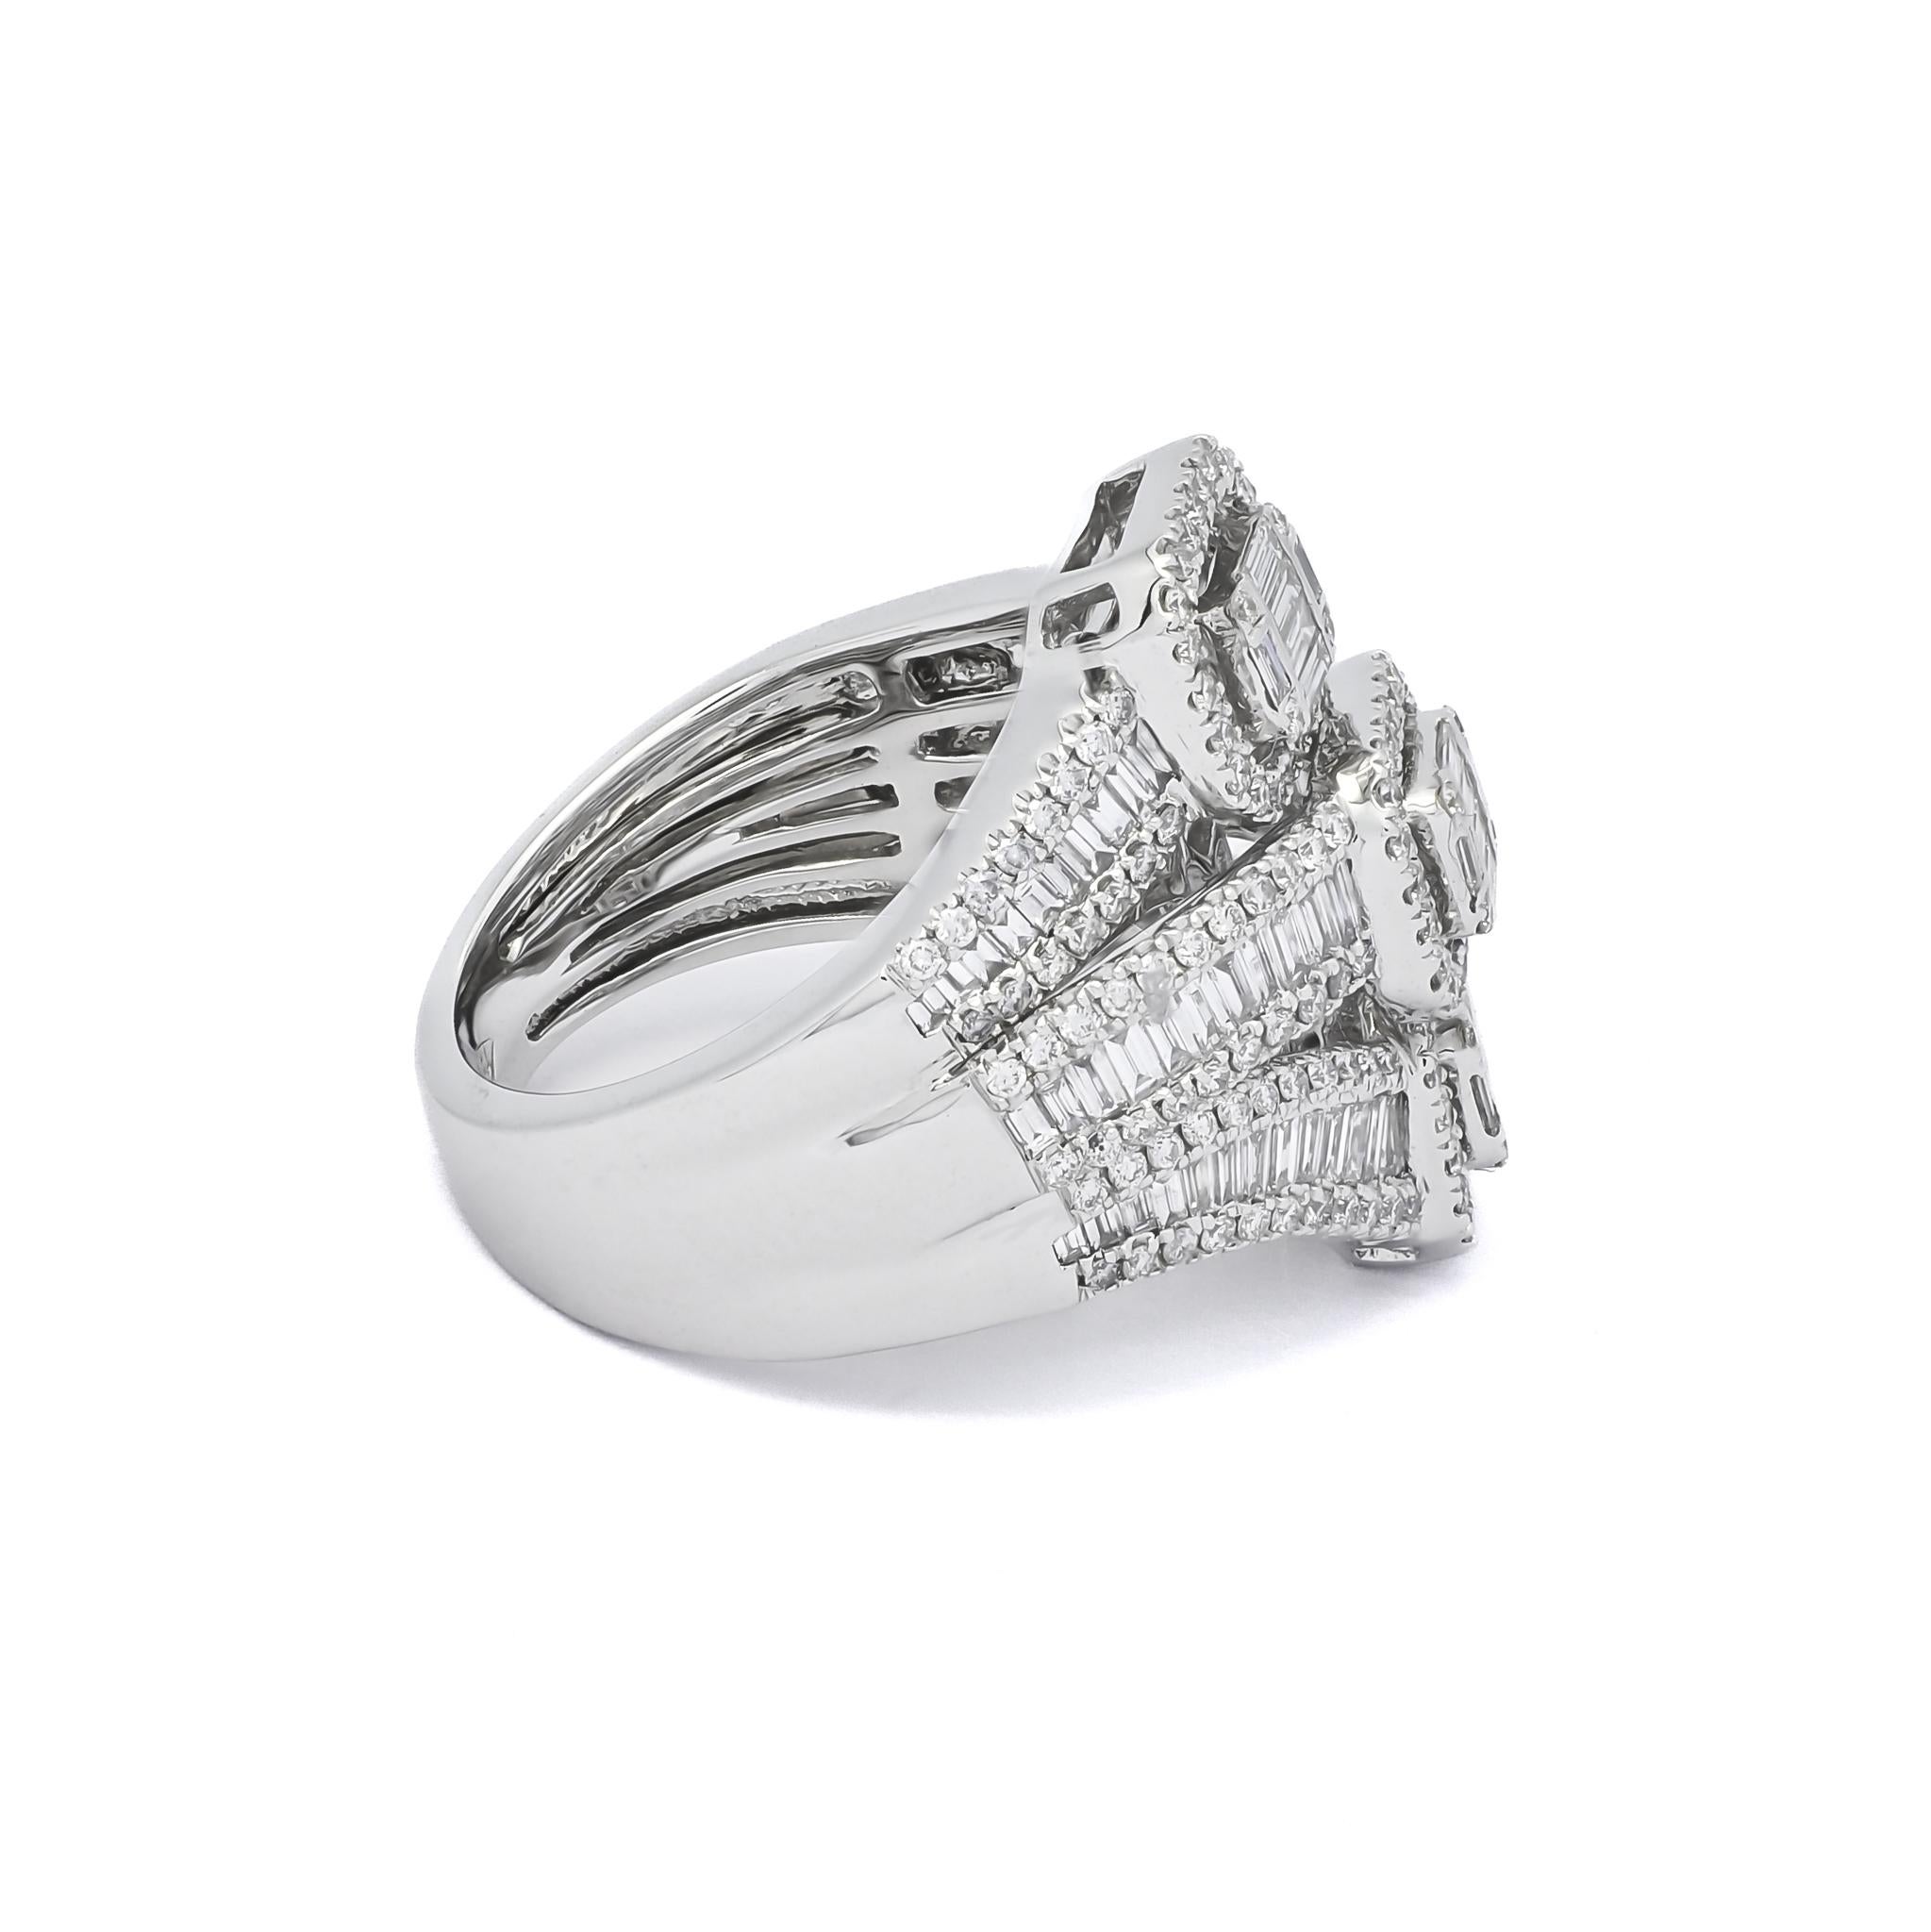 Baguette Cut Natural Diamond 1.8 carats 18KT White Gold Cocktail Ring For Sale